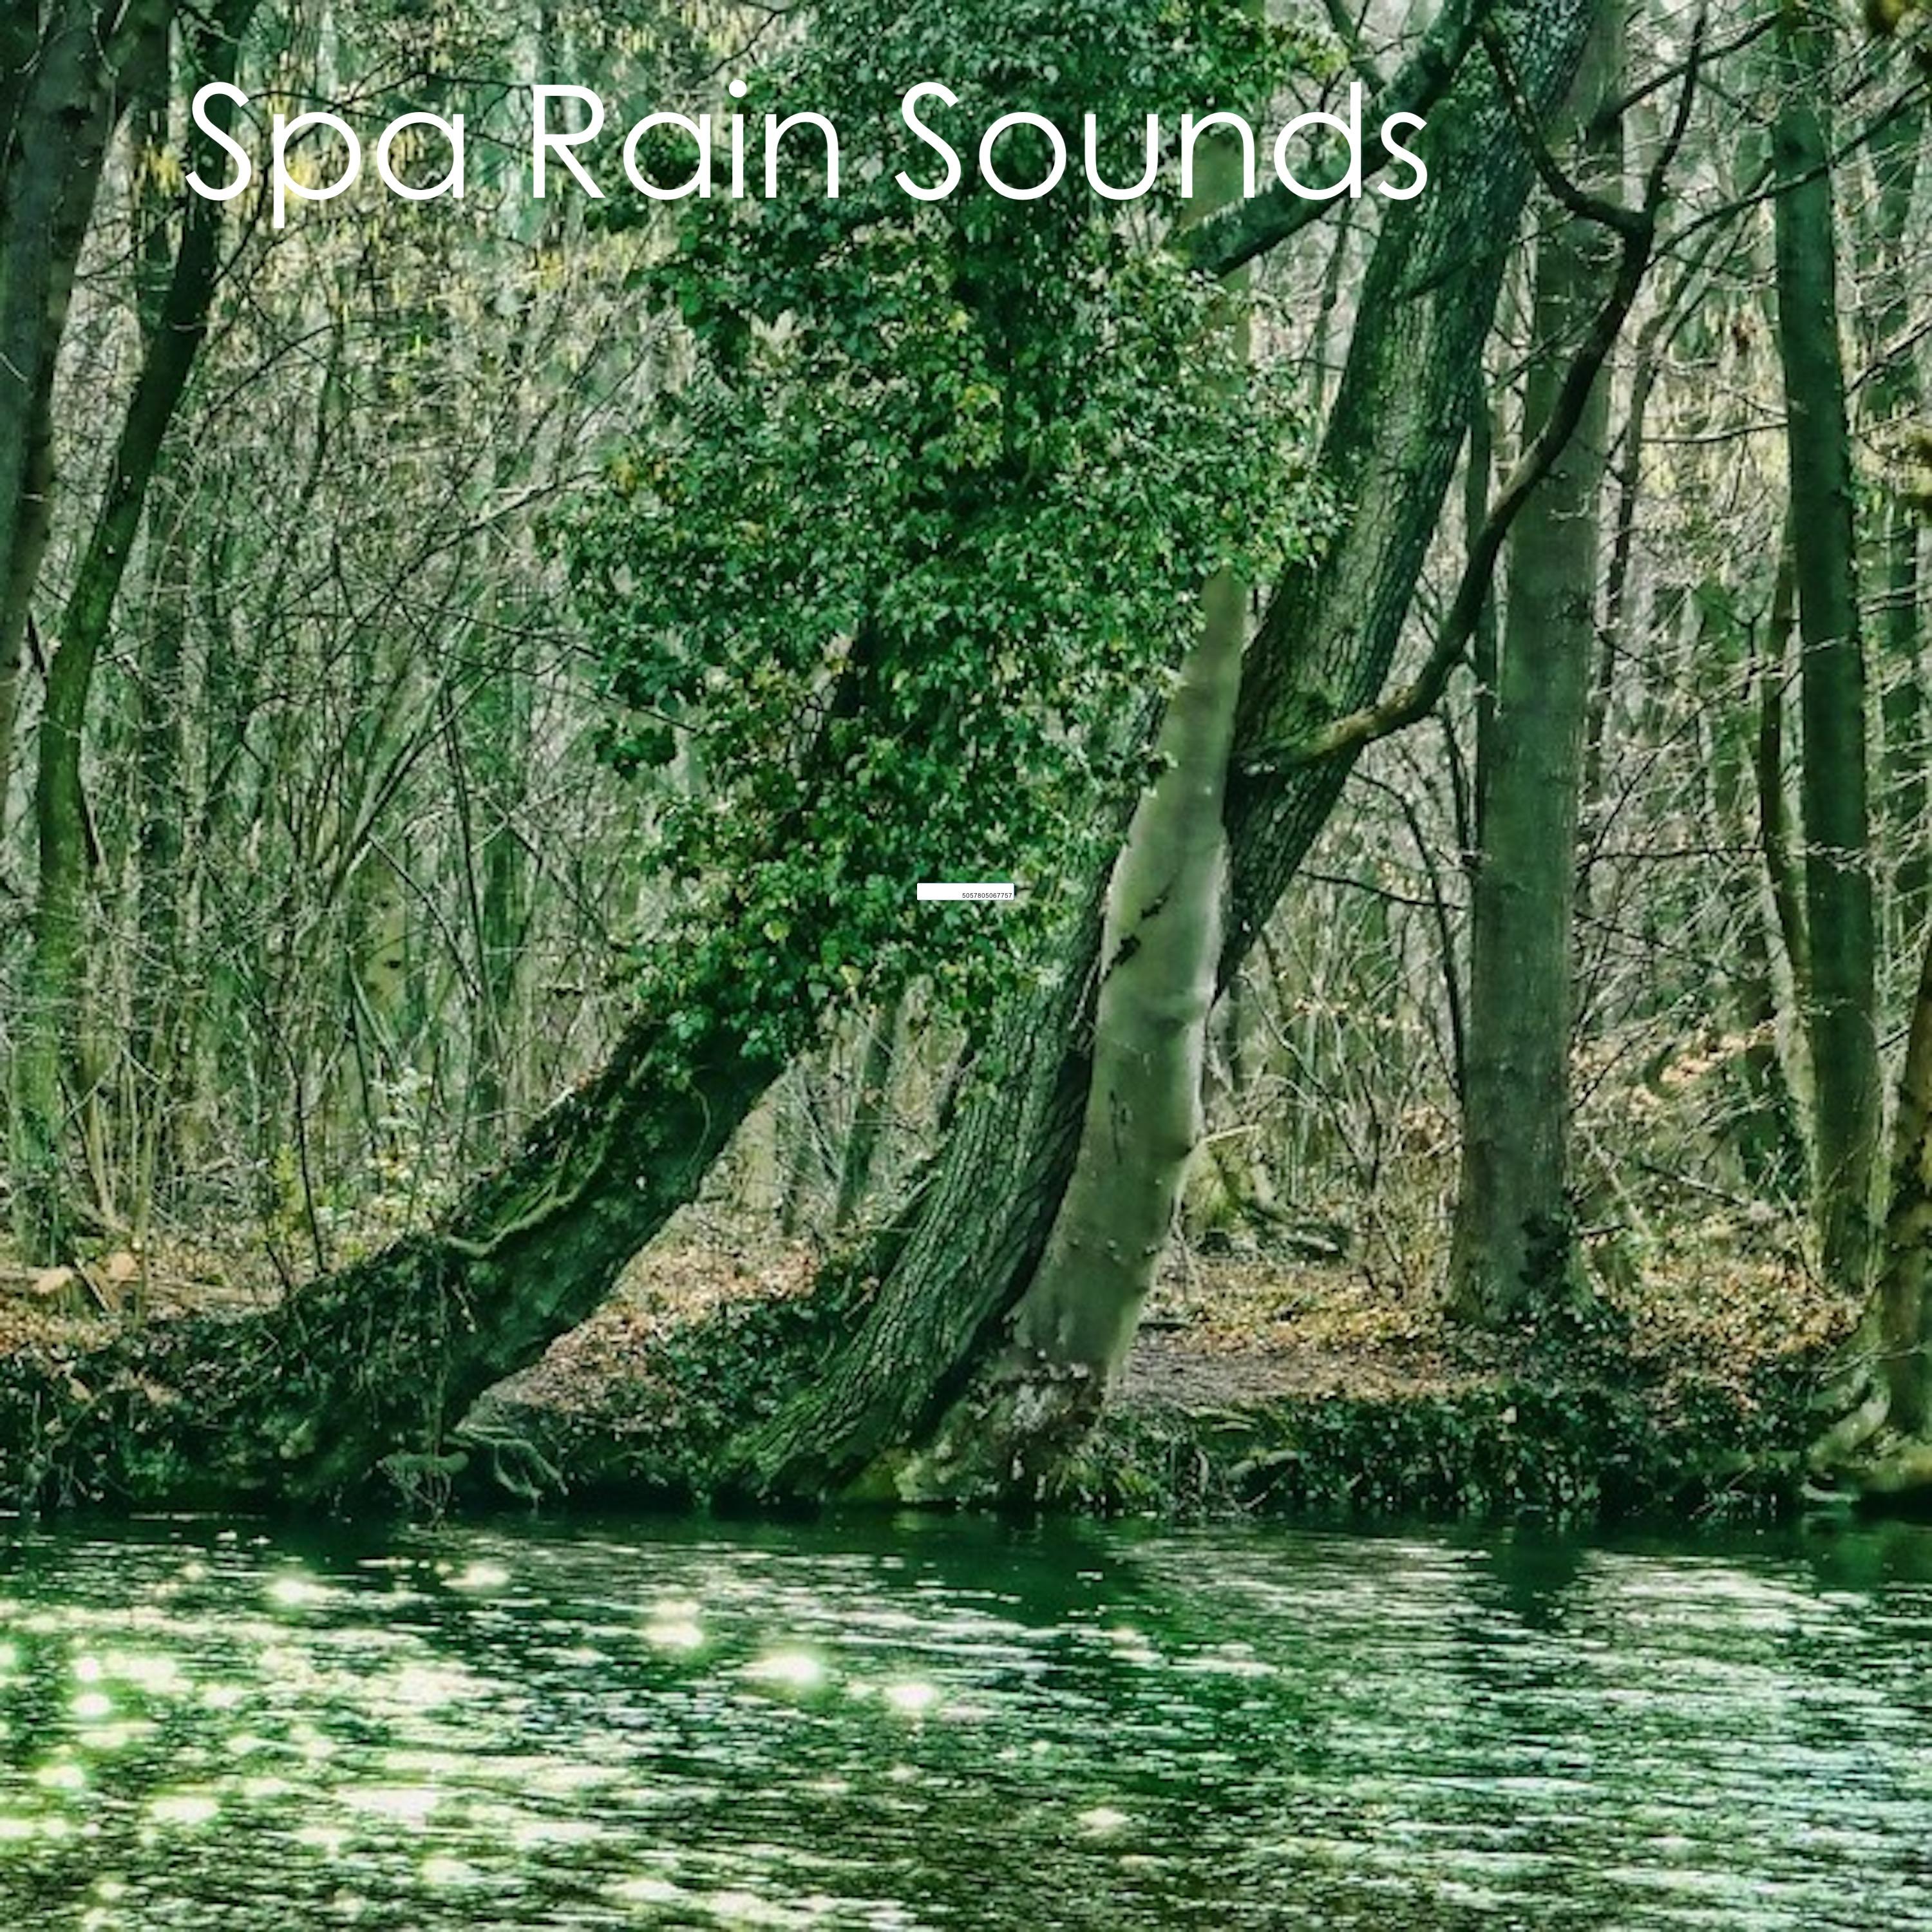 10 Spa Rain Sounds - Relaxing, Peaceful, Loopable, Ambient Rain Sounds